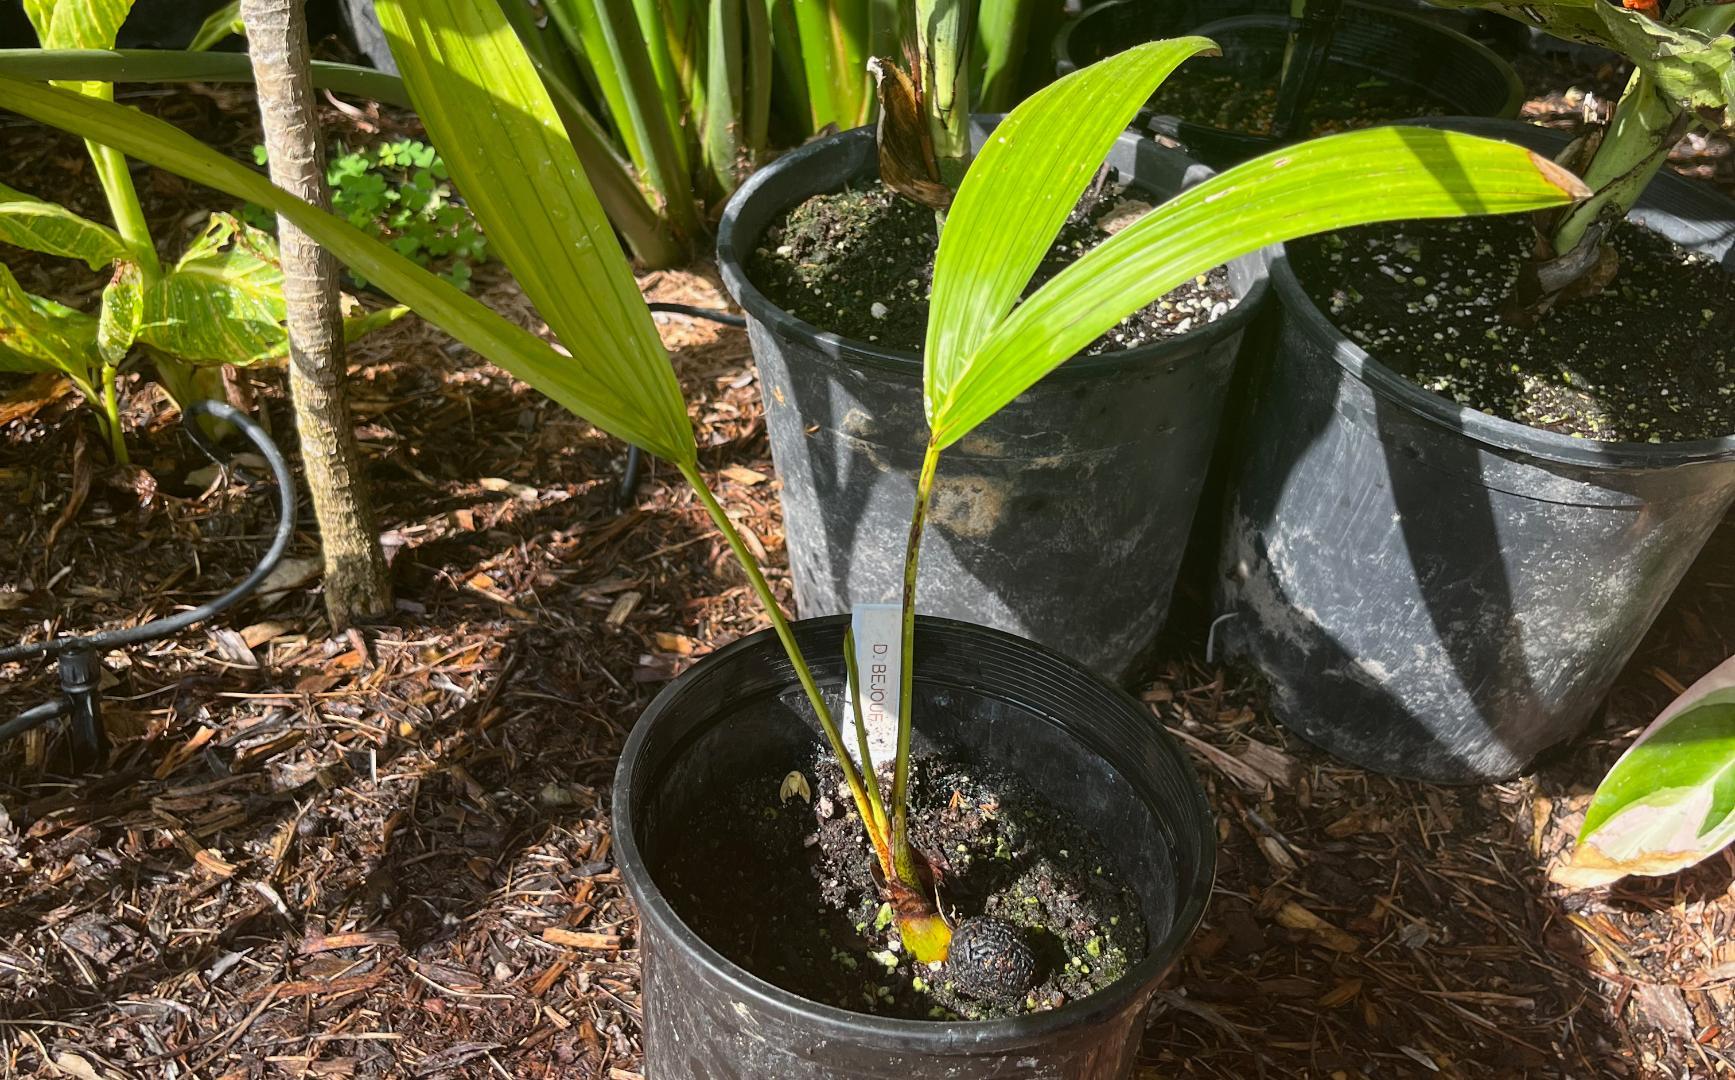 So Dypsis bejouf(a) is now Chrsalidocarpus titan, any others out there ...